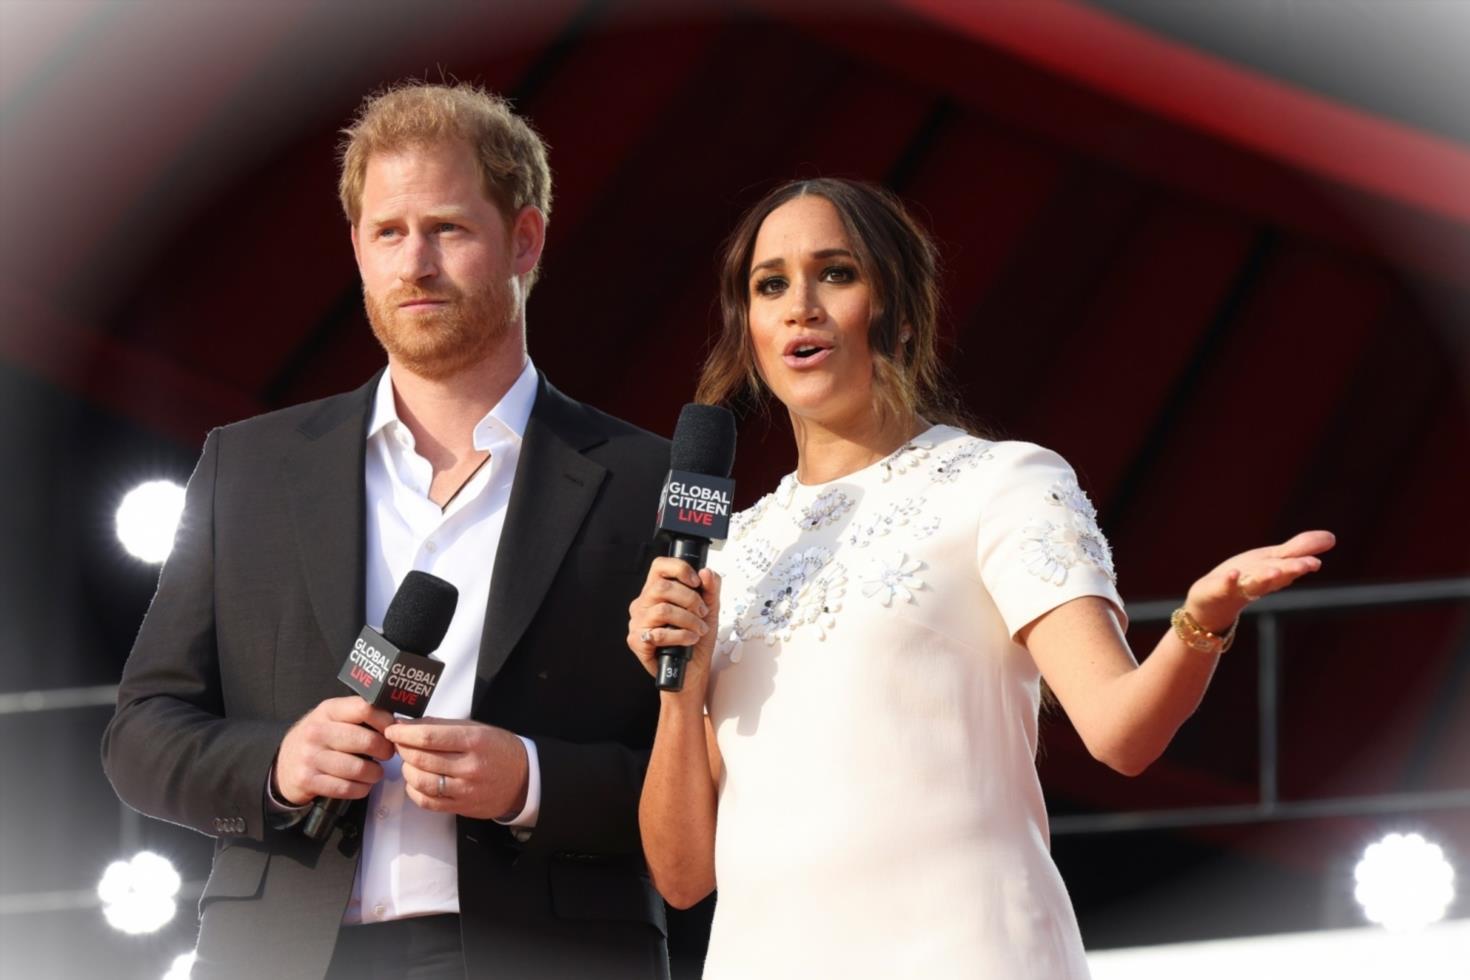 Prince Harry and Meghan Markles Titles Debated at Top Levels Yett2rrrg5uO 4